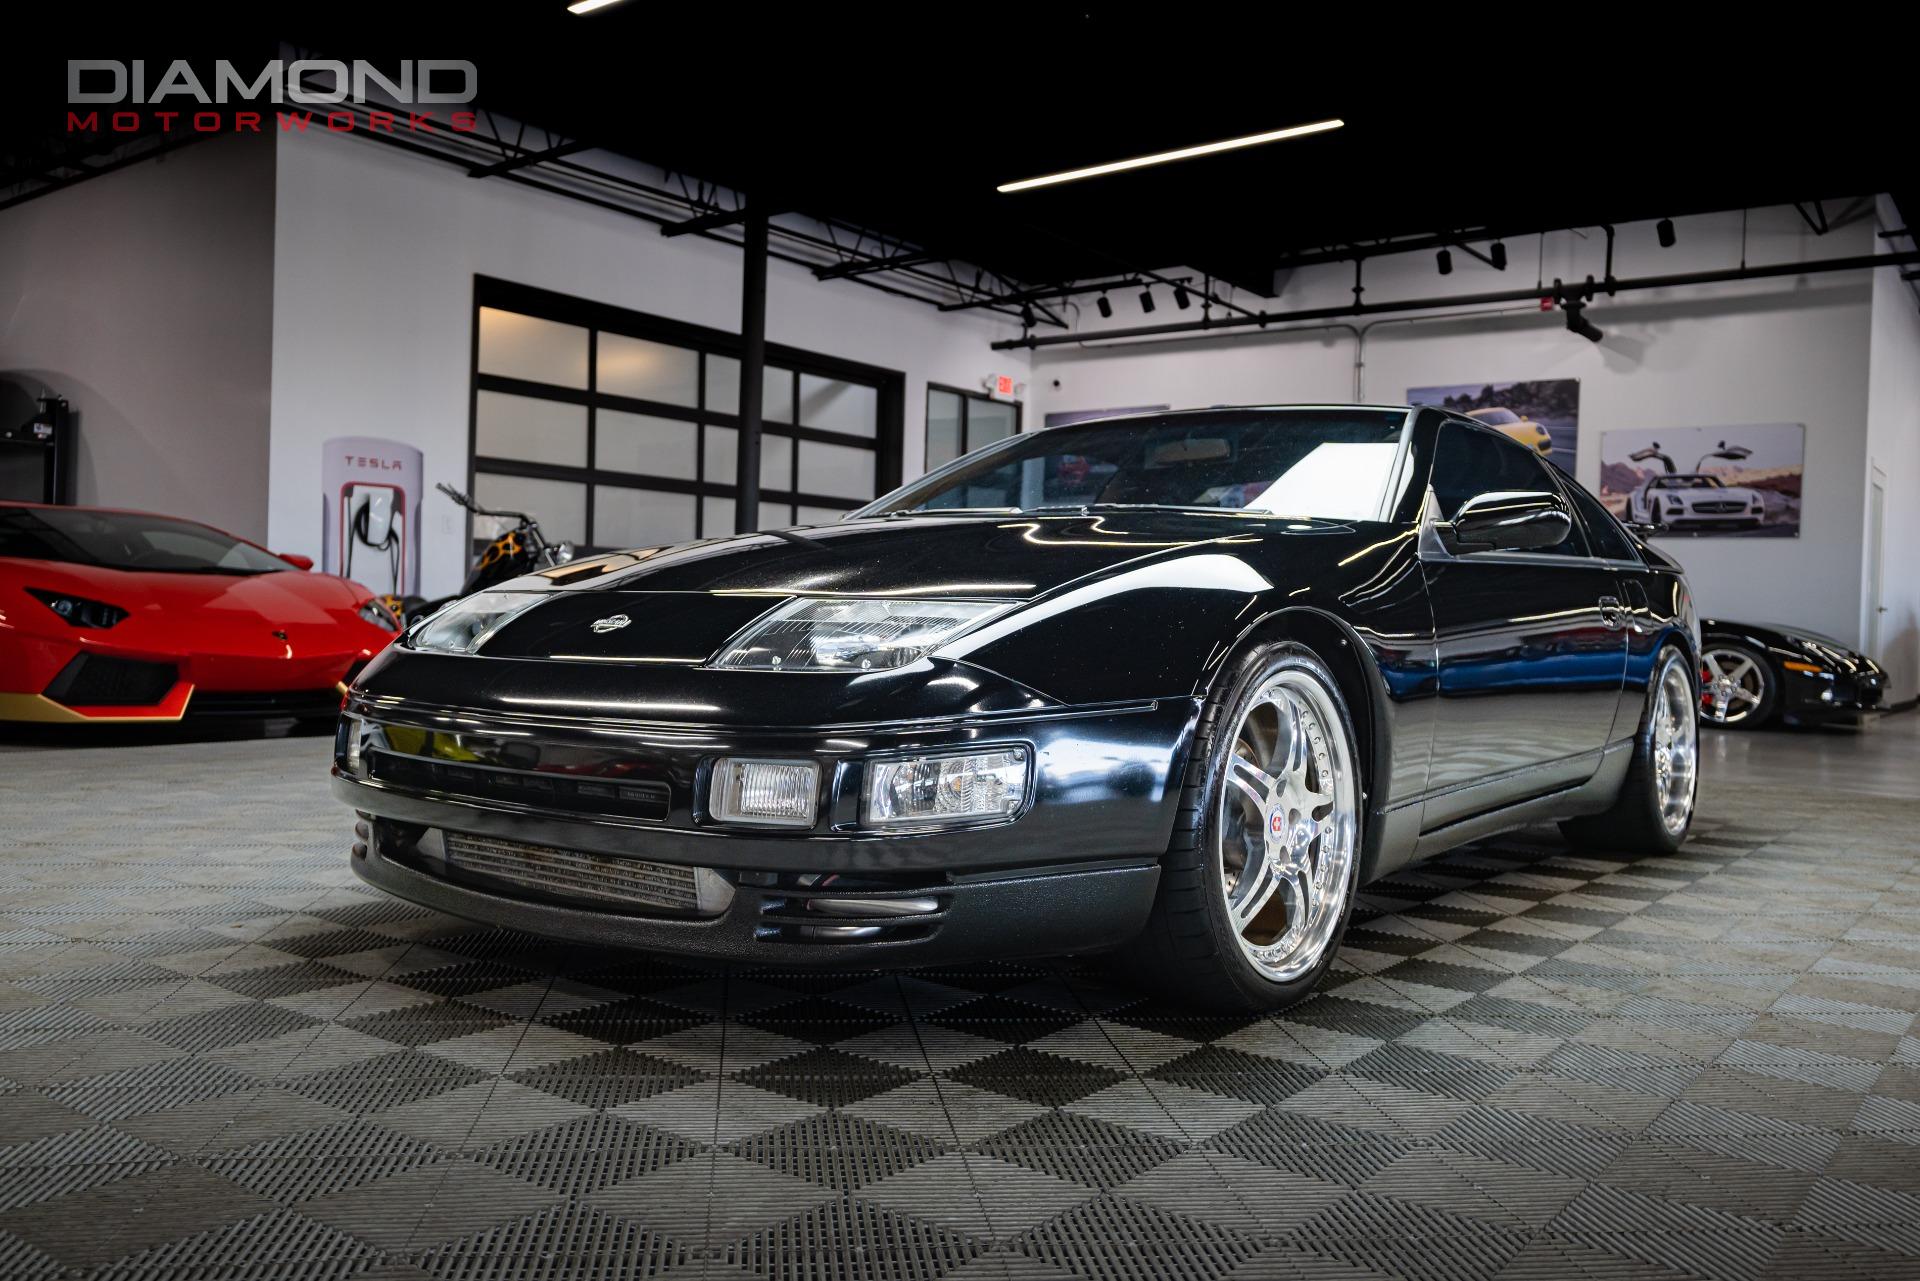 Used 1995 Nissan 300ZX Turbo For Sale (Sold) | Diamond Motorworks 